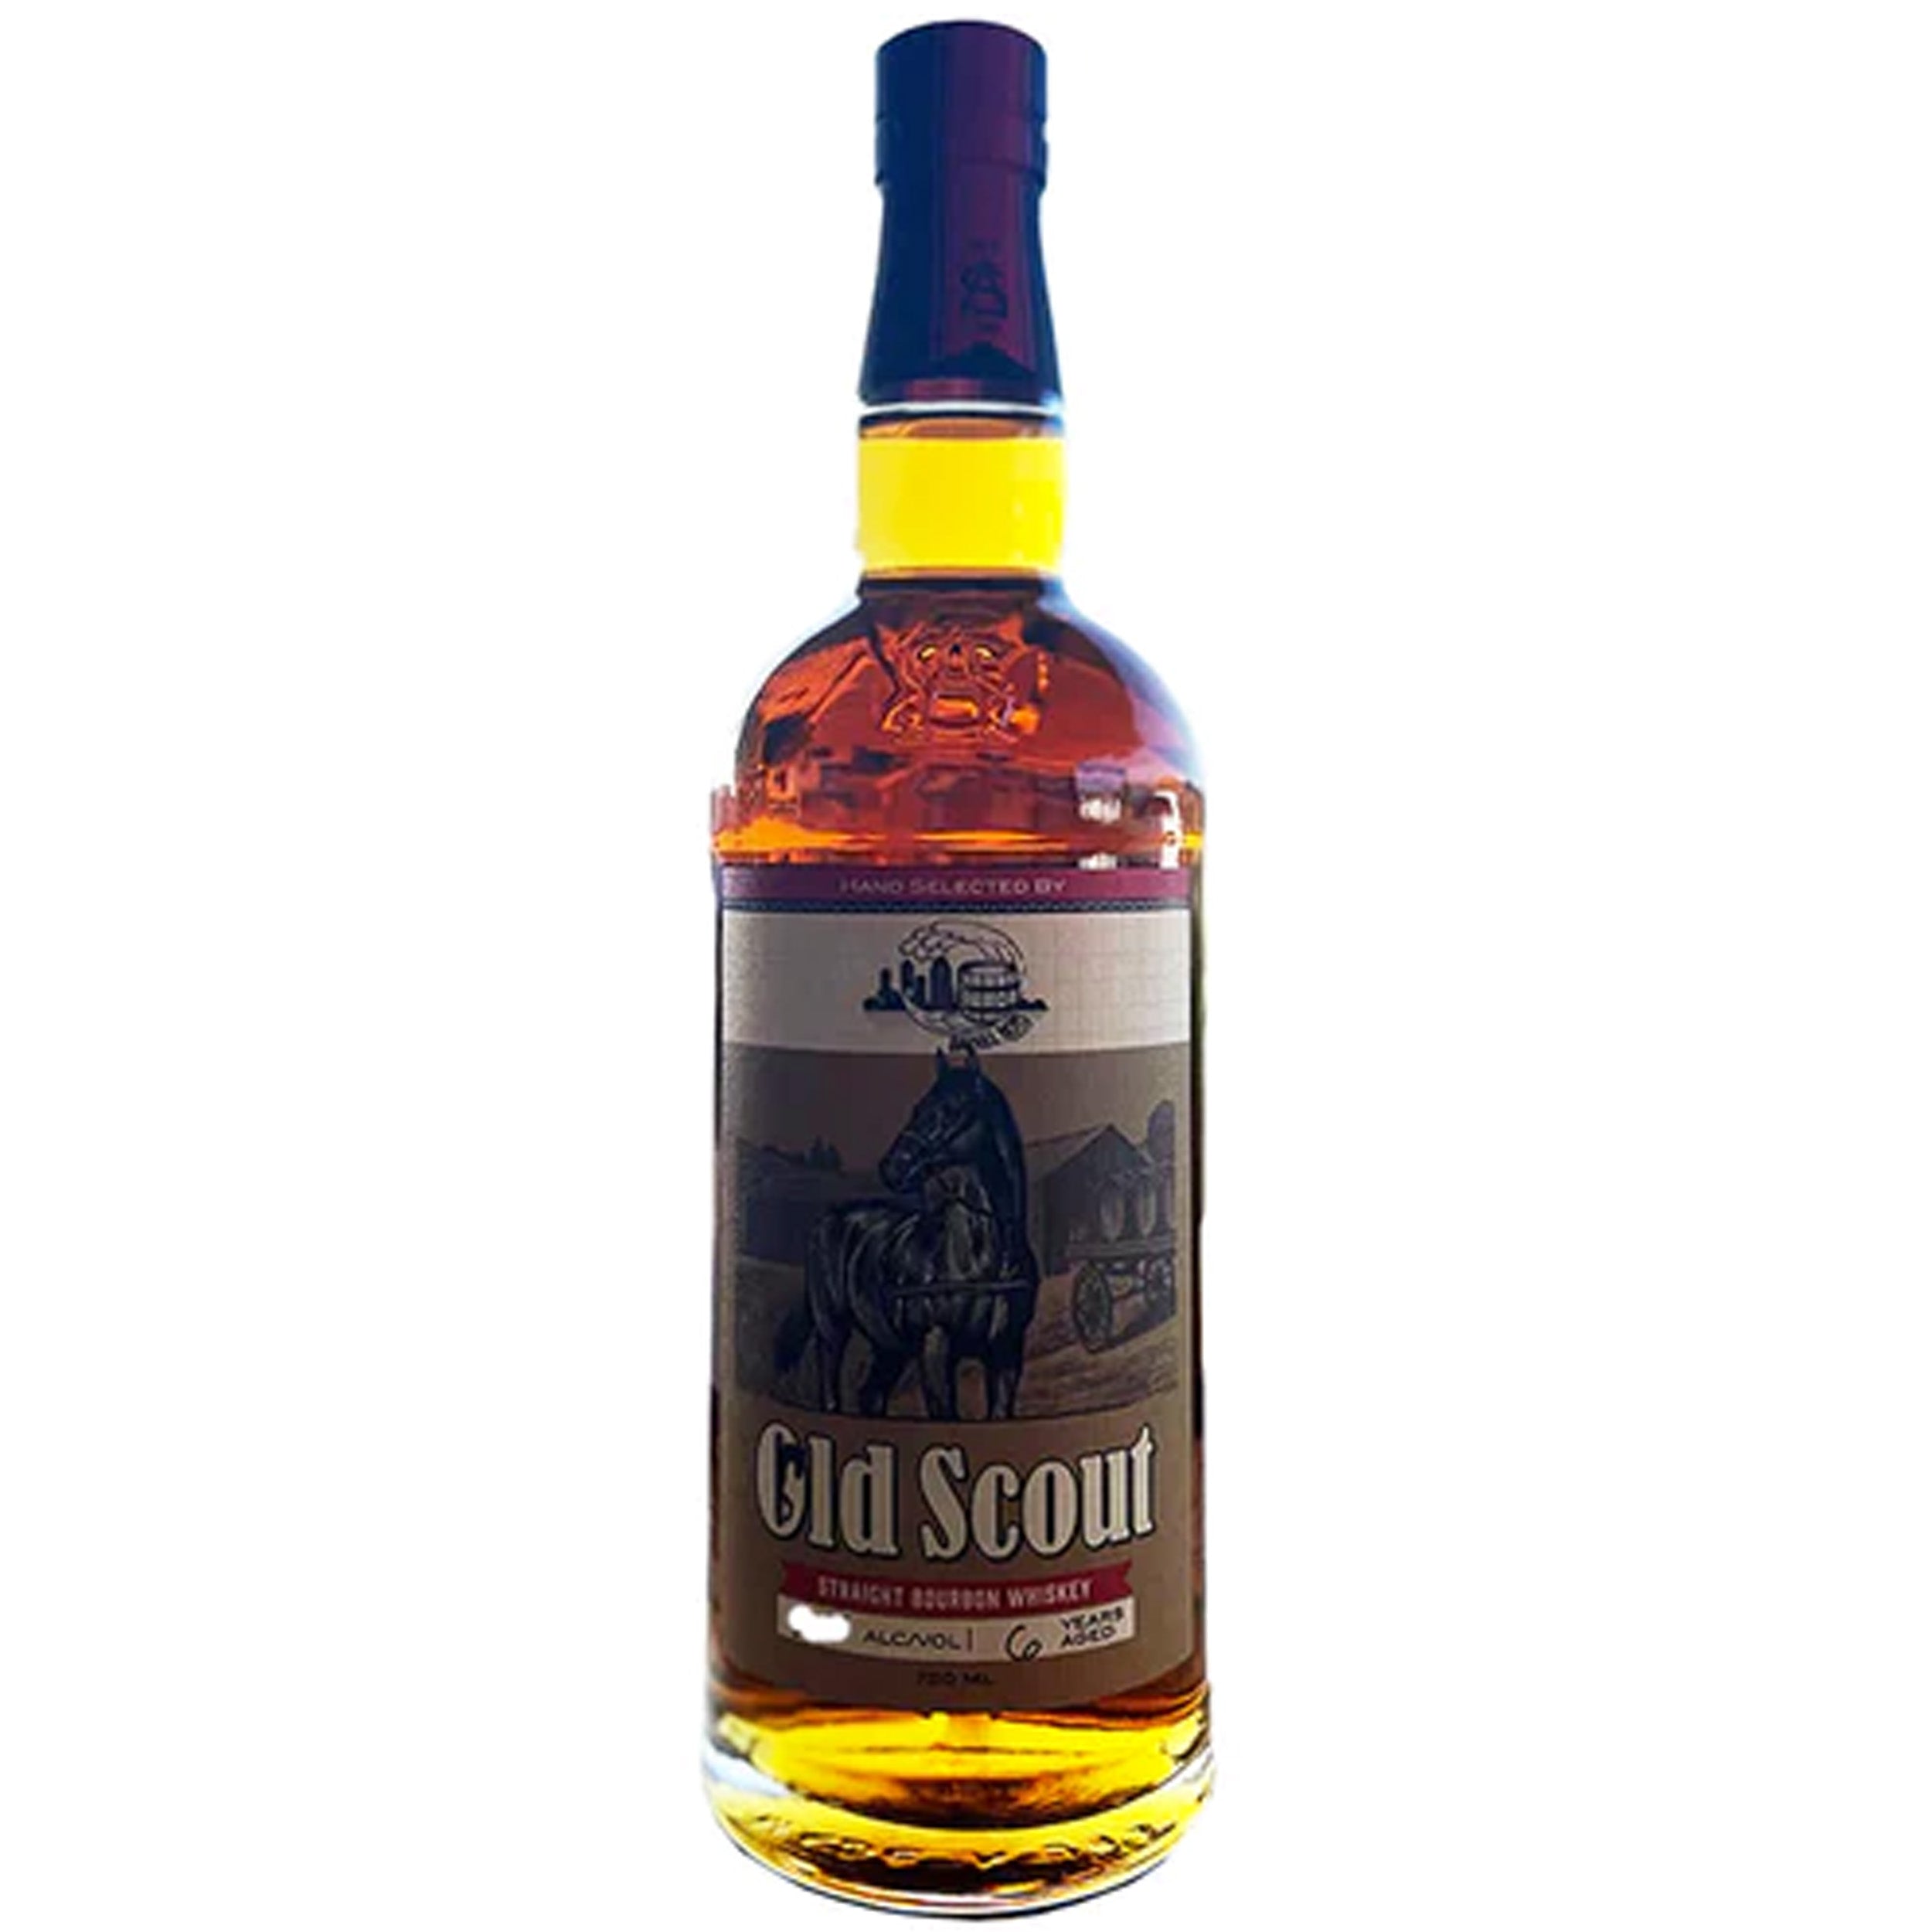 Smooth Ambler Old Scout #24509 6 Year Single Barrel Bourbon Whiskey - SDBB Private Selection